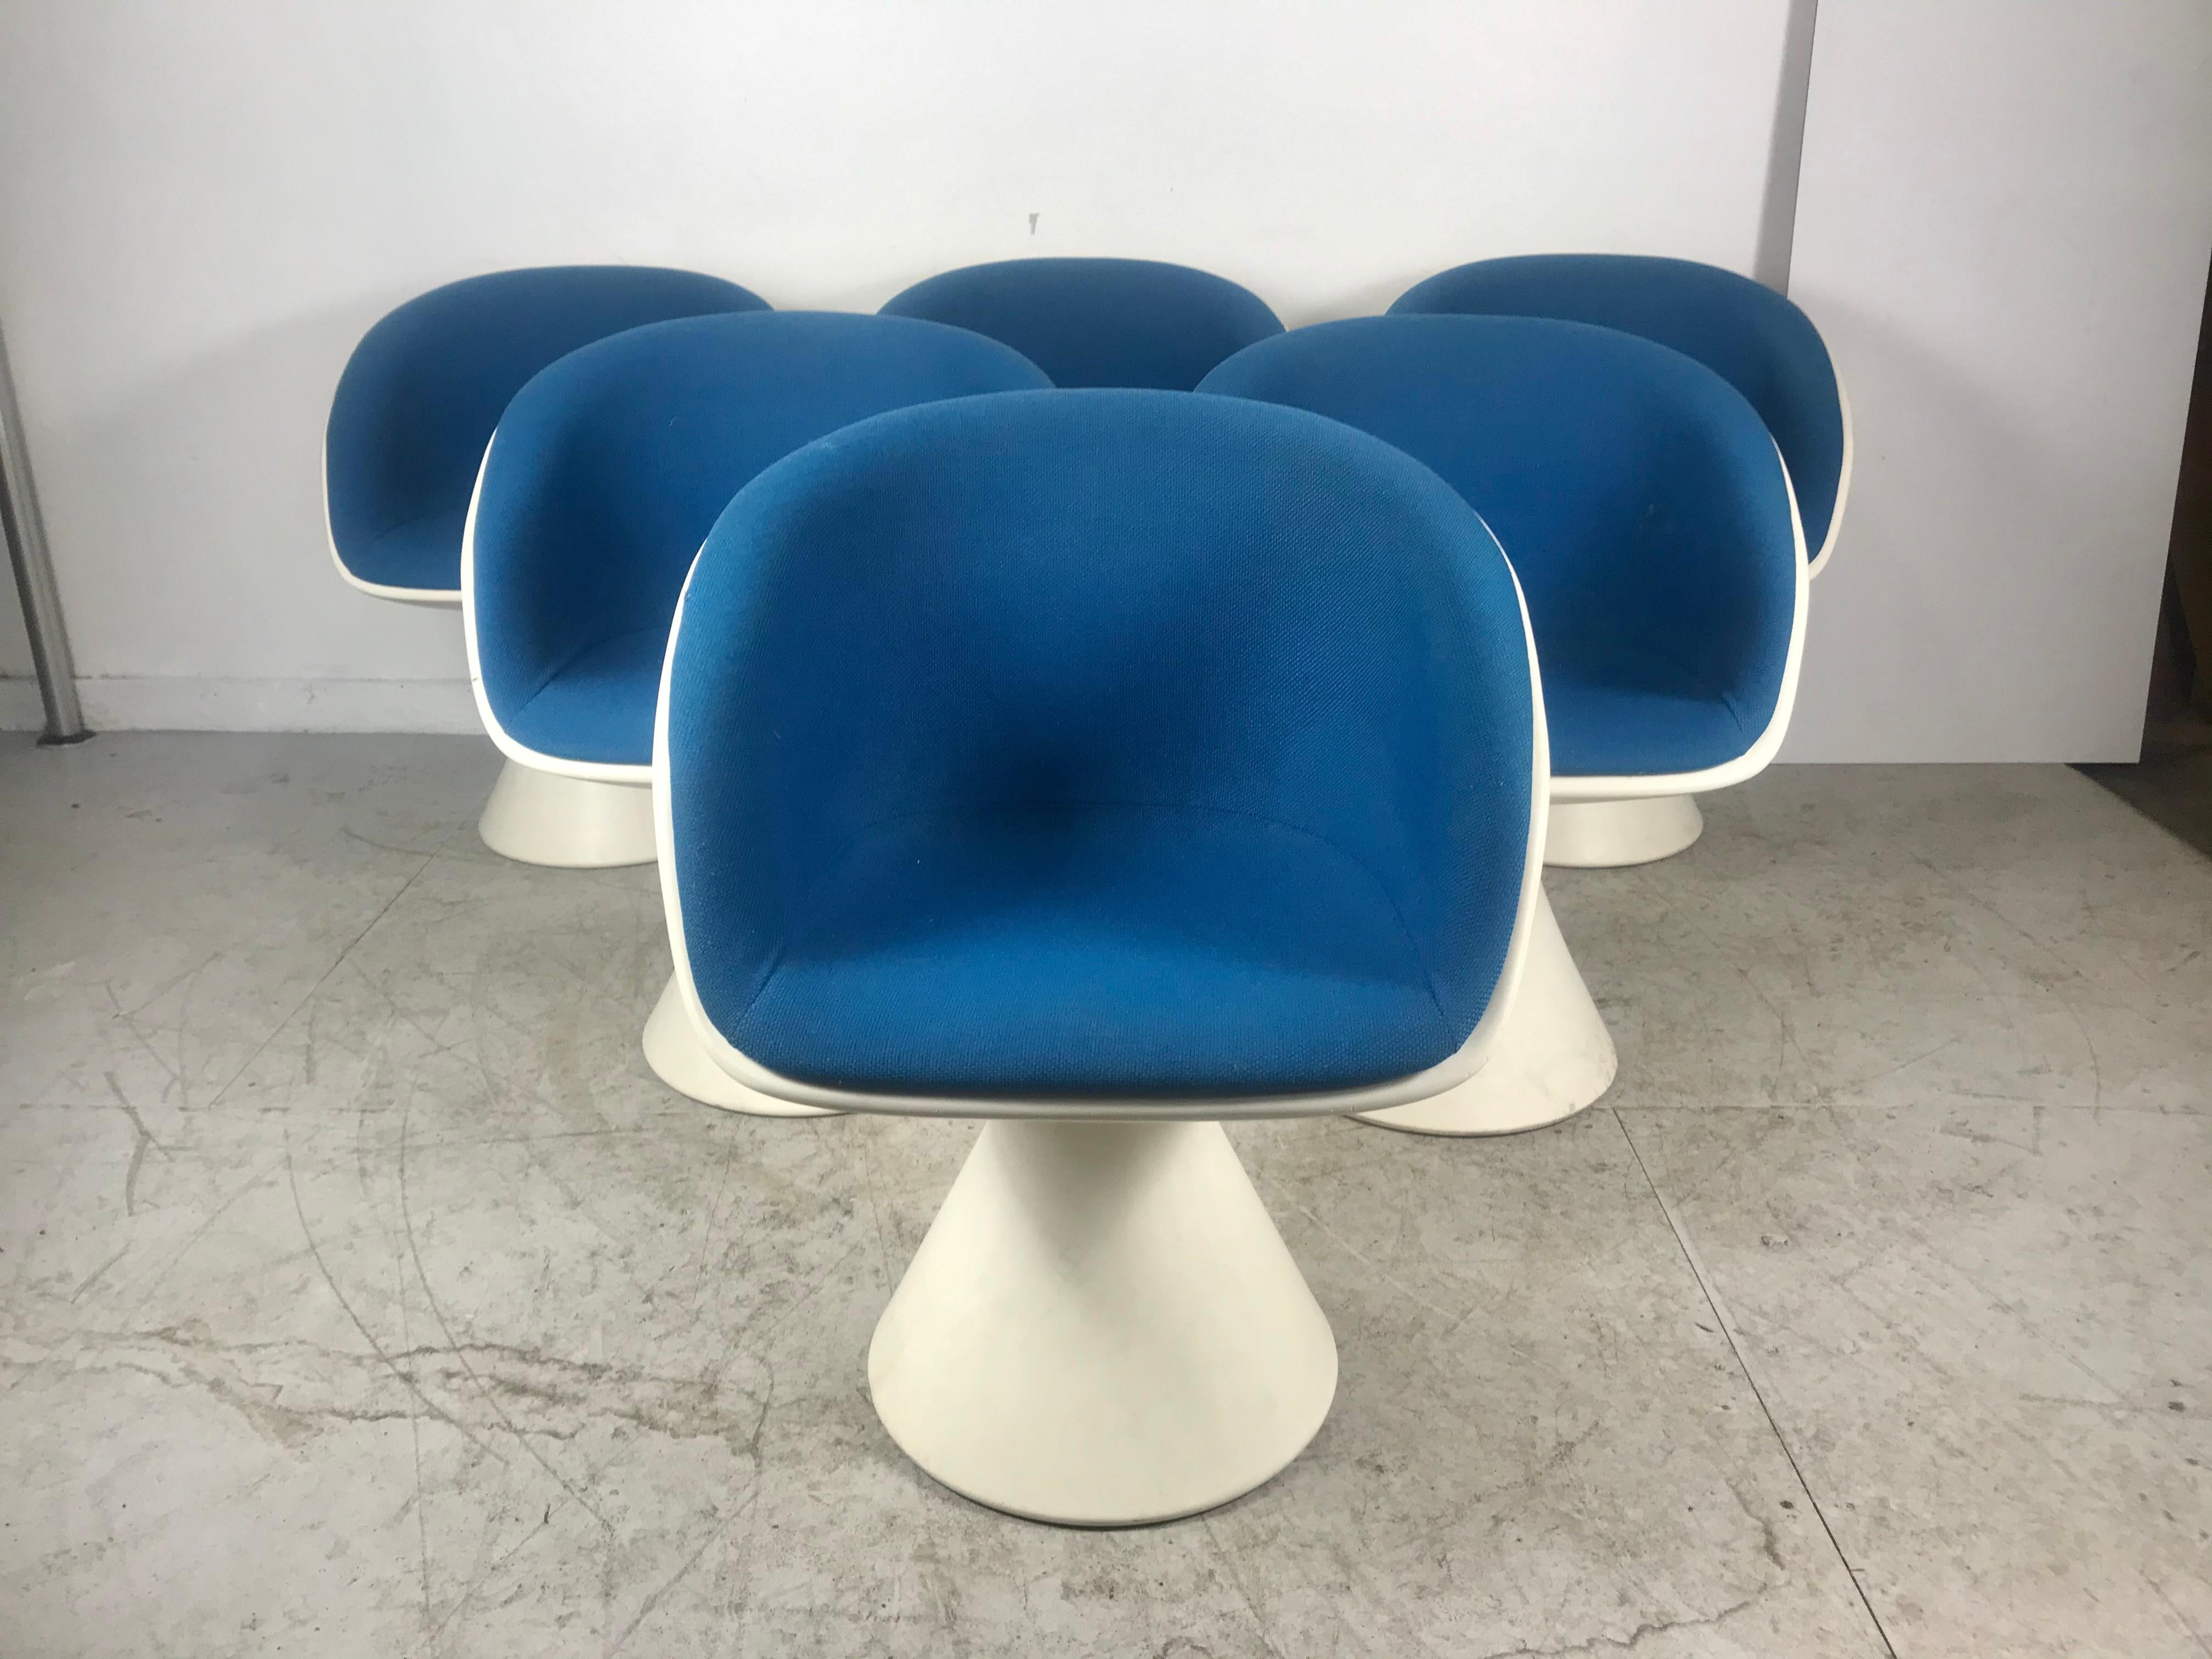 Modernist, Space Age dining set consisting of six swivel tulip armchairs designed by Maurice Burke in 1966 for Arkana, Bath, UK. Classic 1960s design. Retain original blue wool (Herman Miller), Girard fabric. In nice original condition, extremely